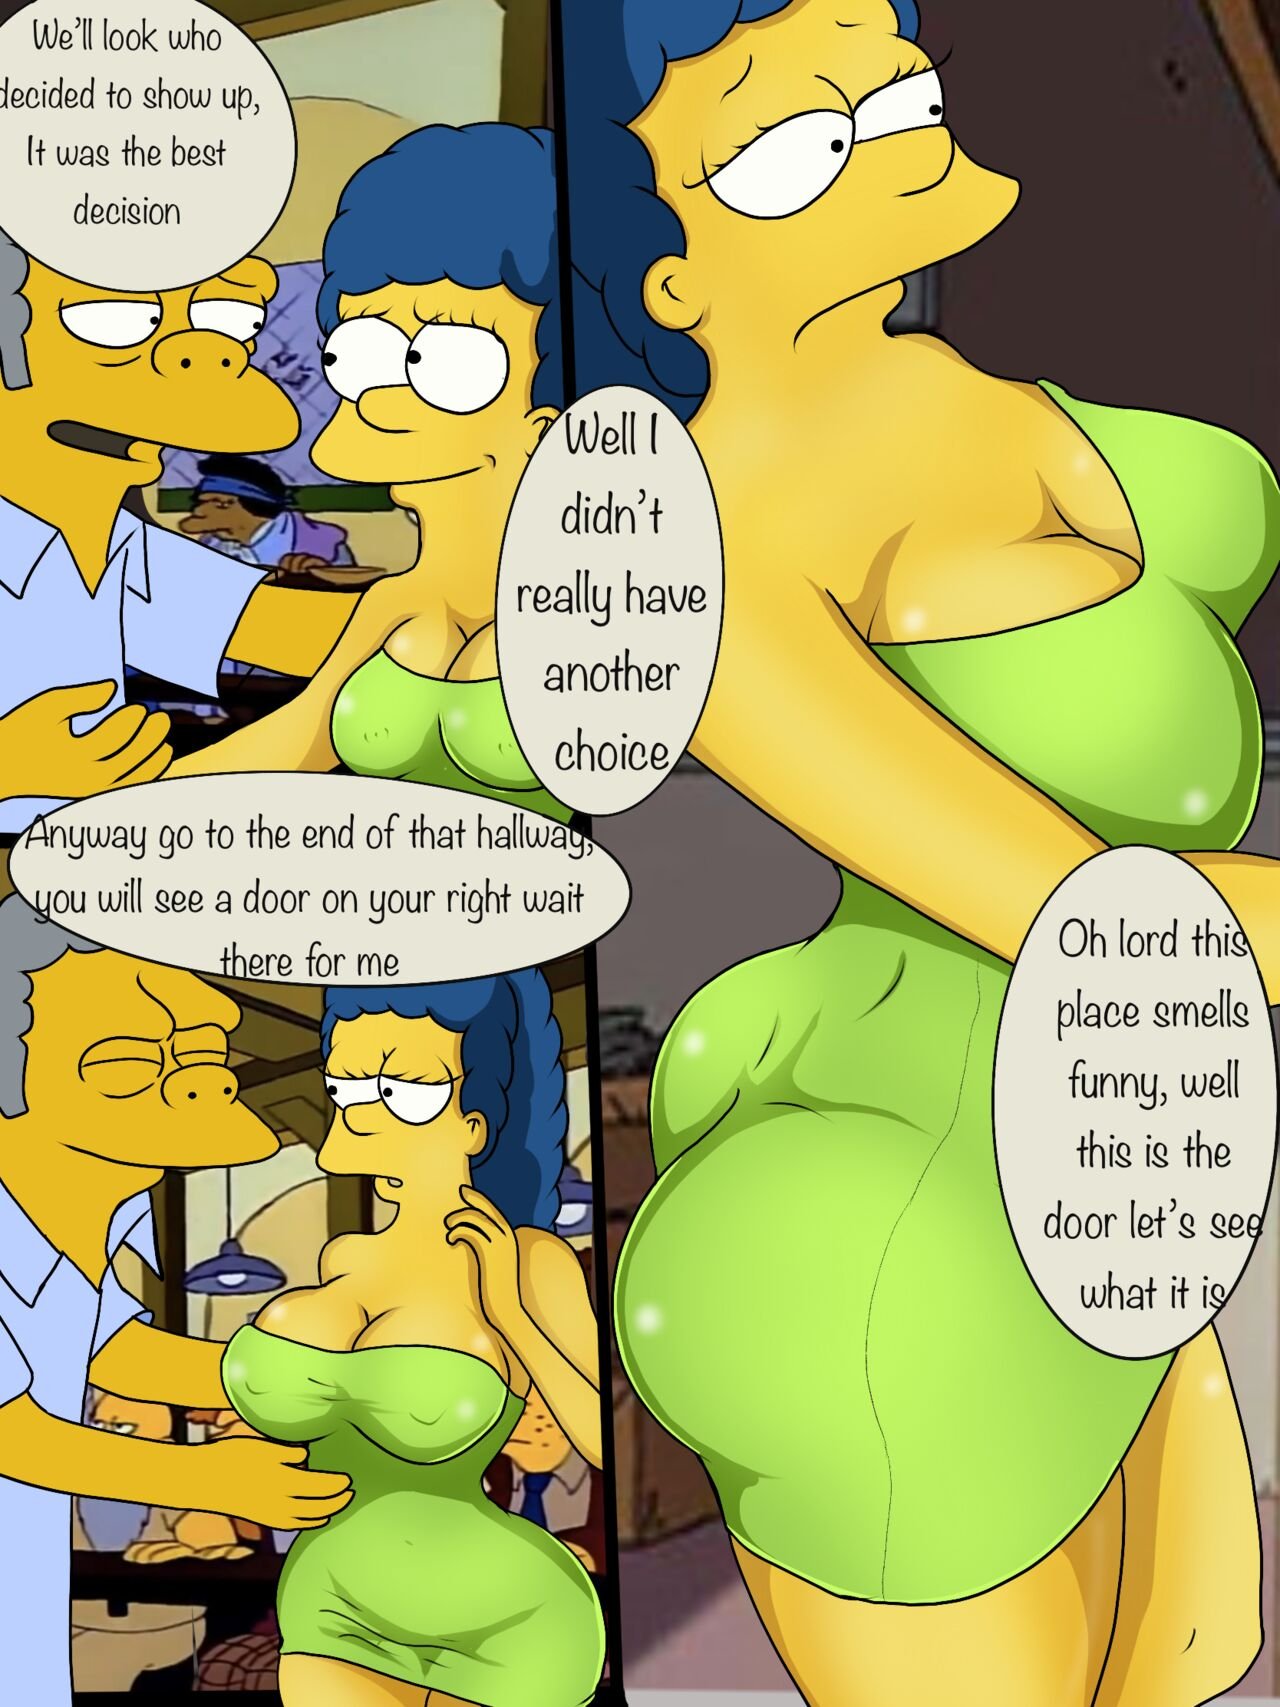 Homeless Lucky Day – The Simpsons by Bobs200